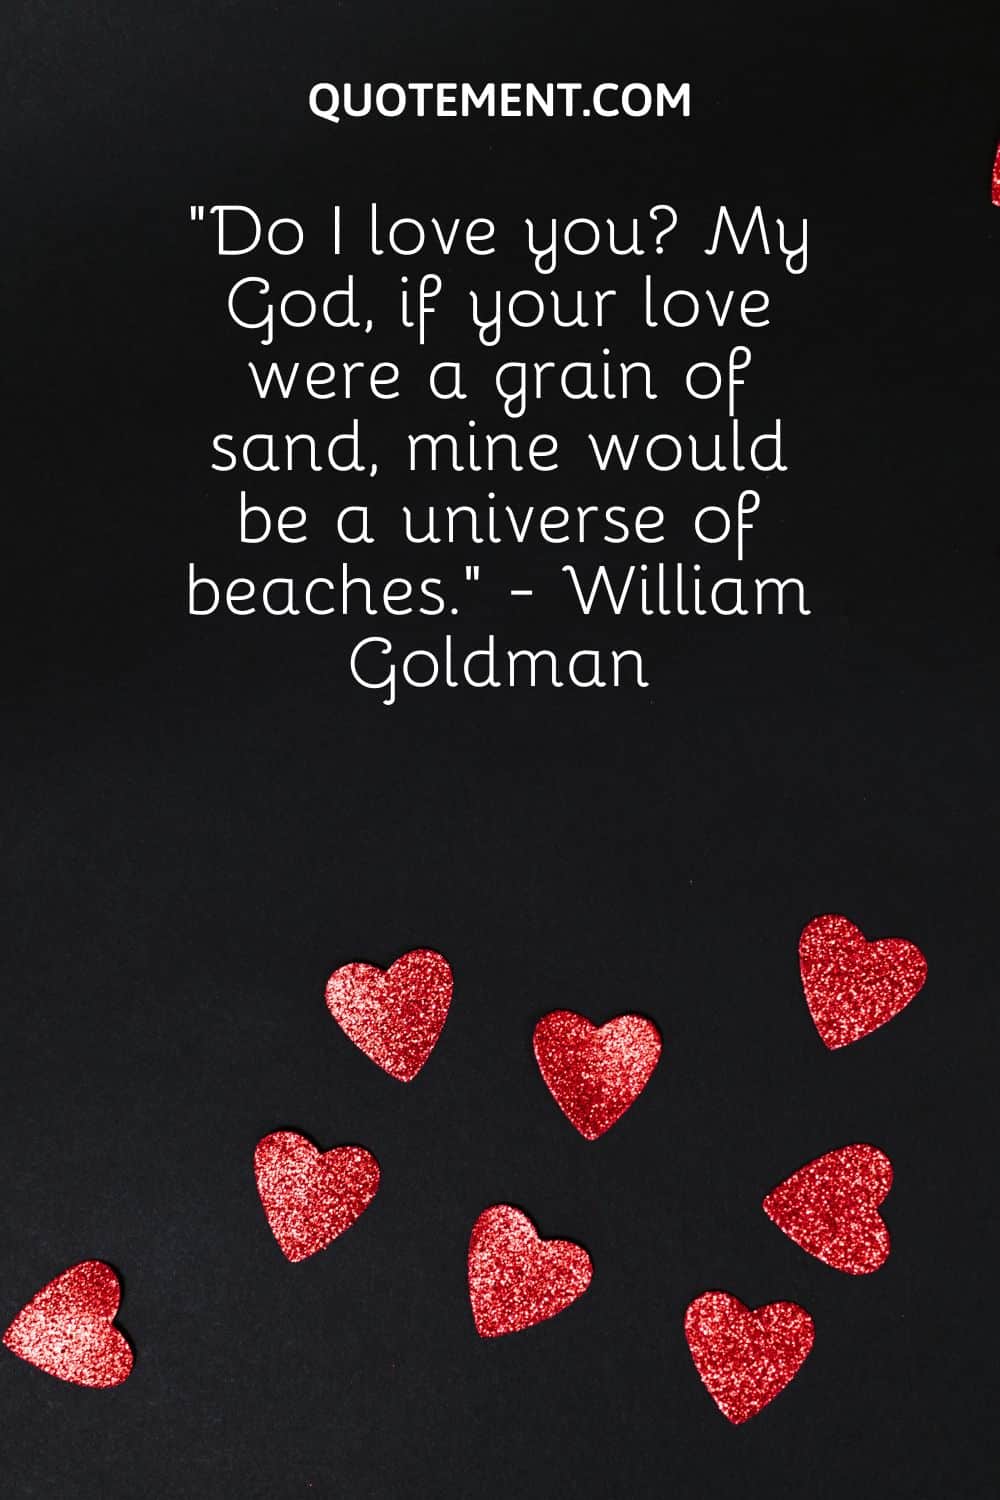 “Do I love you My God, if your love were a grain of sand, mine would be a universe of beaches.” - William Goldman